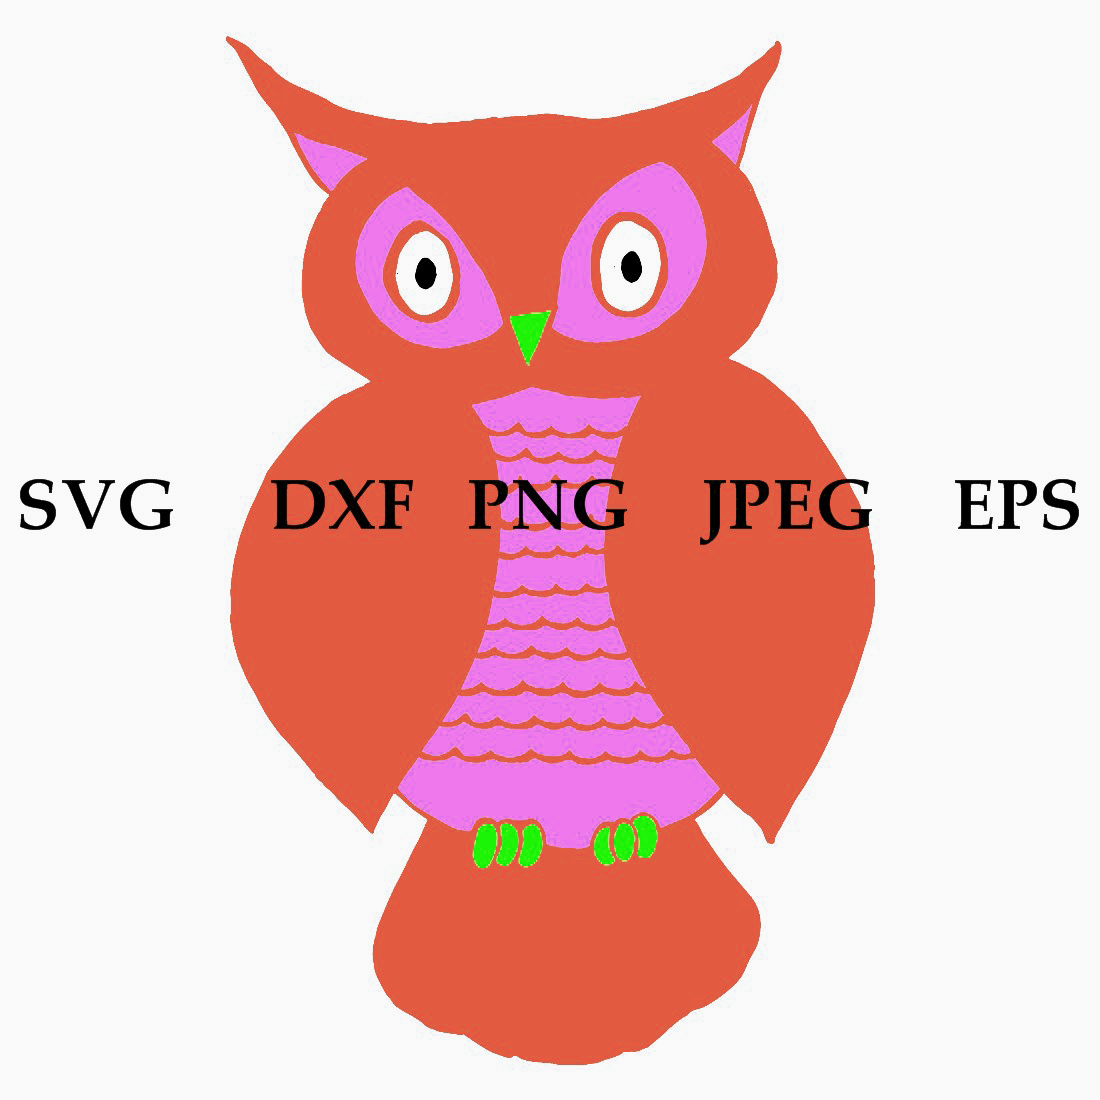 Owl DXF SVG Stickers Rustic cover image.